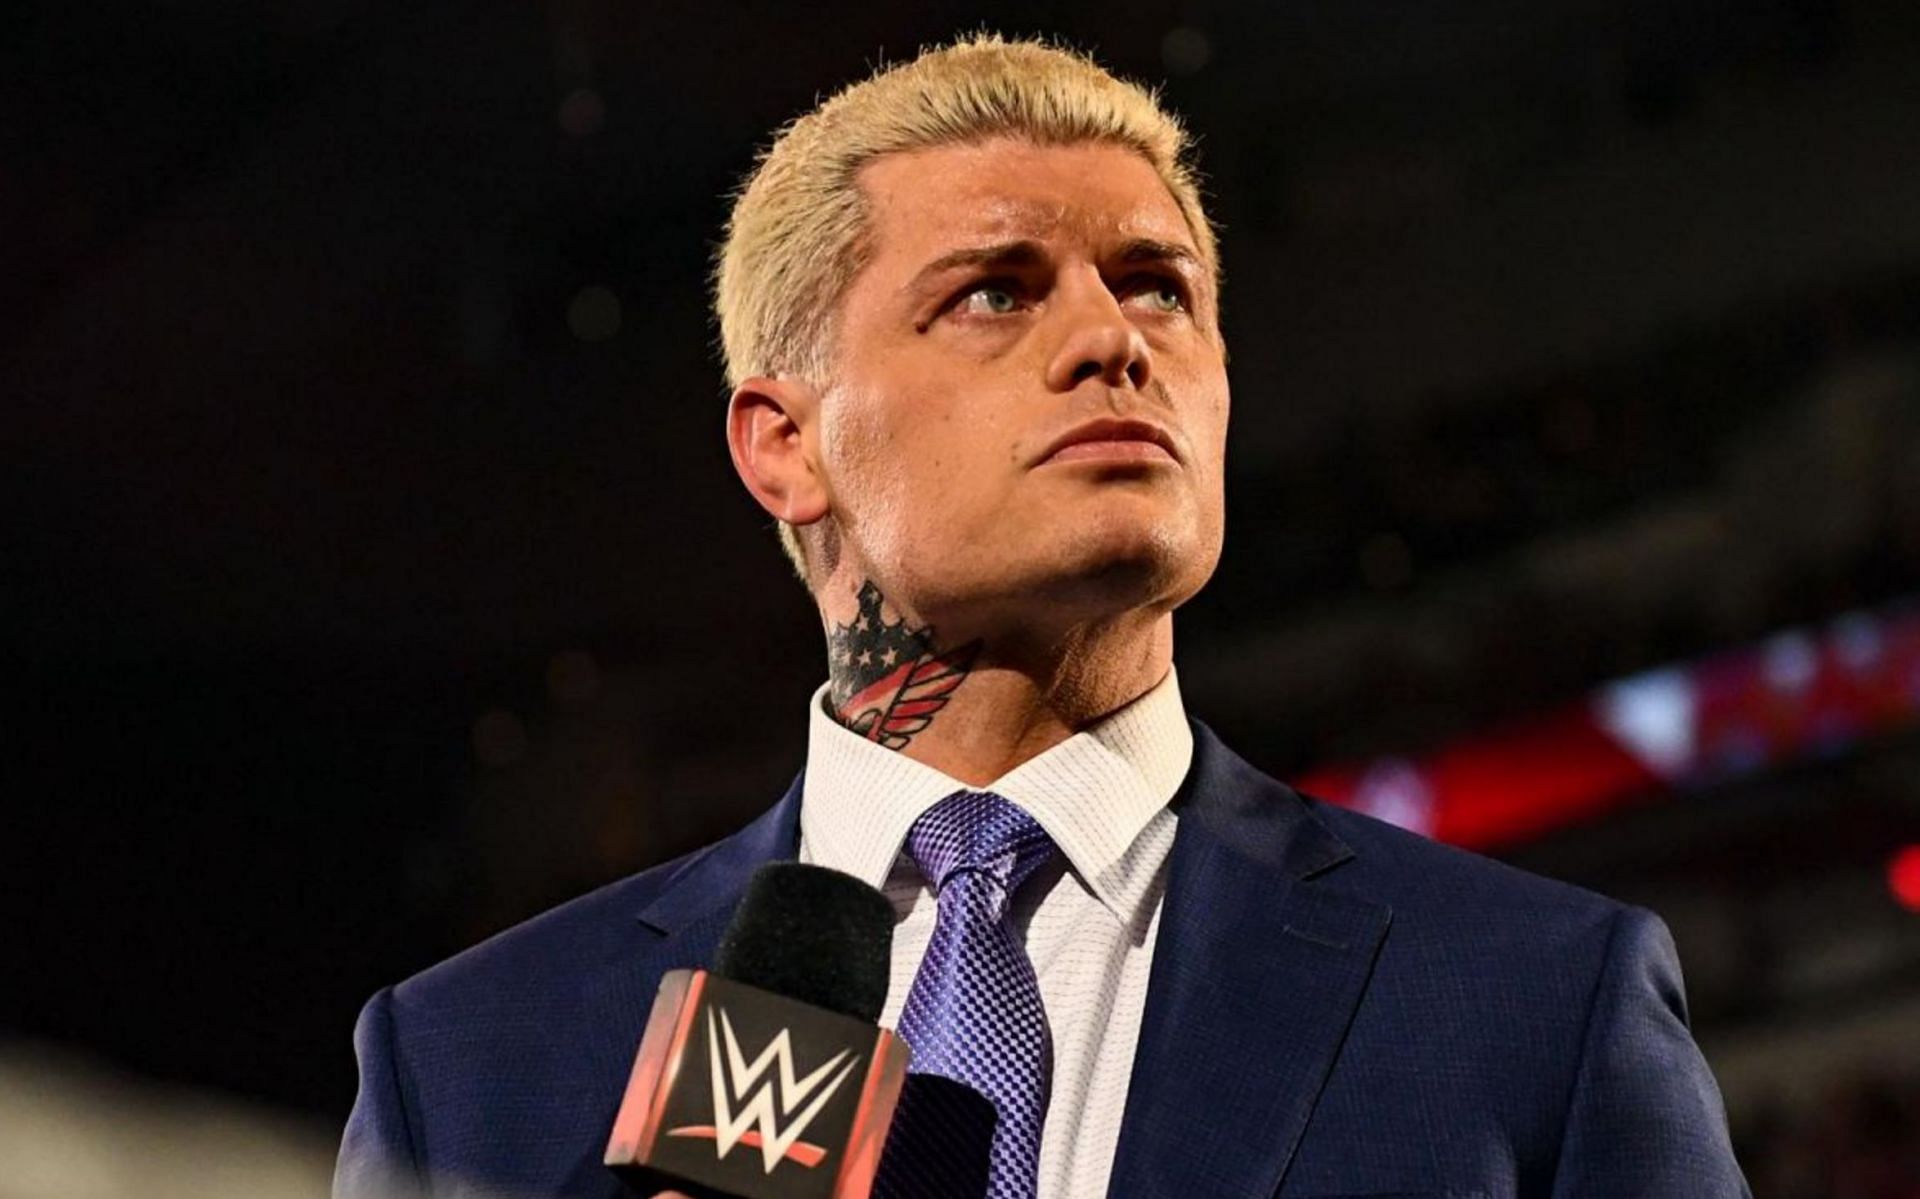 Cody Rhodes paid tribute to his father on RAW this week.